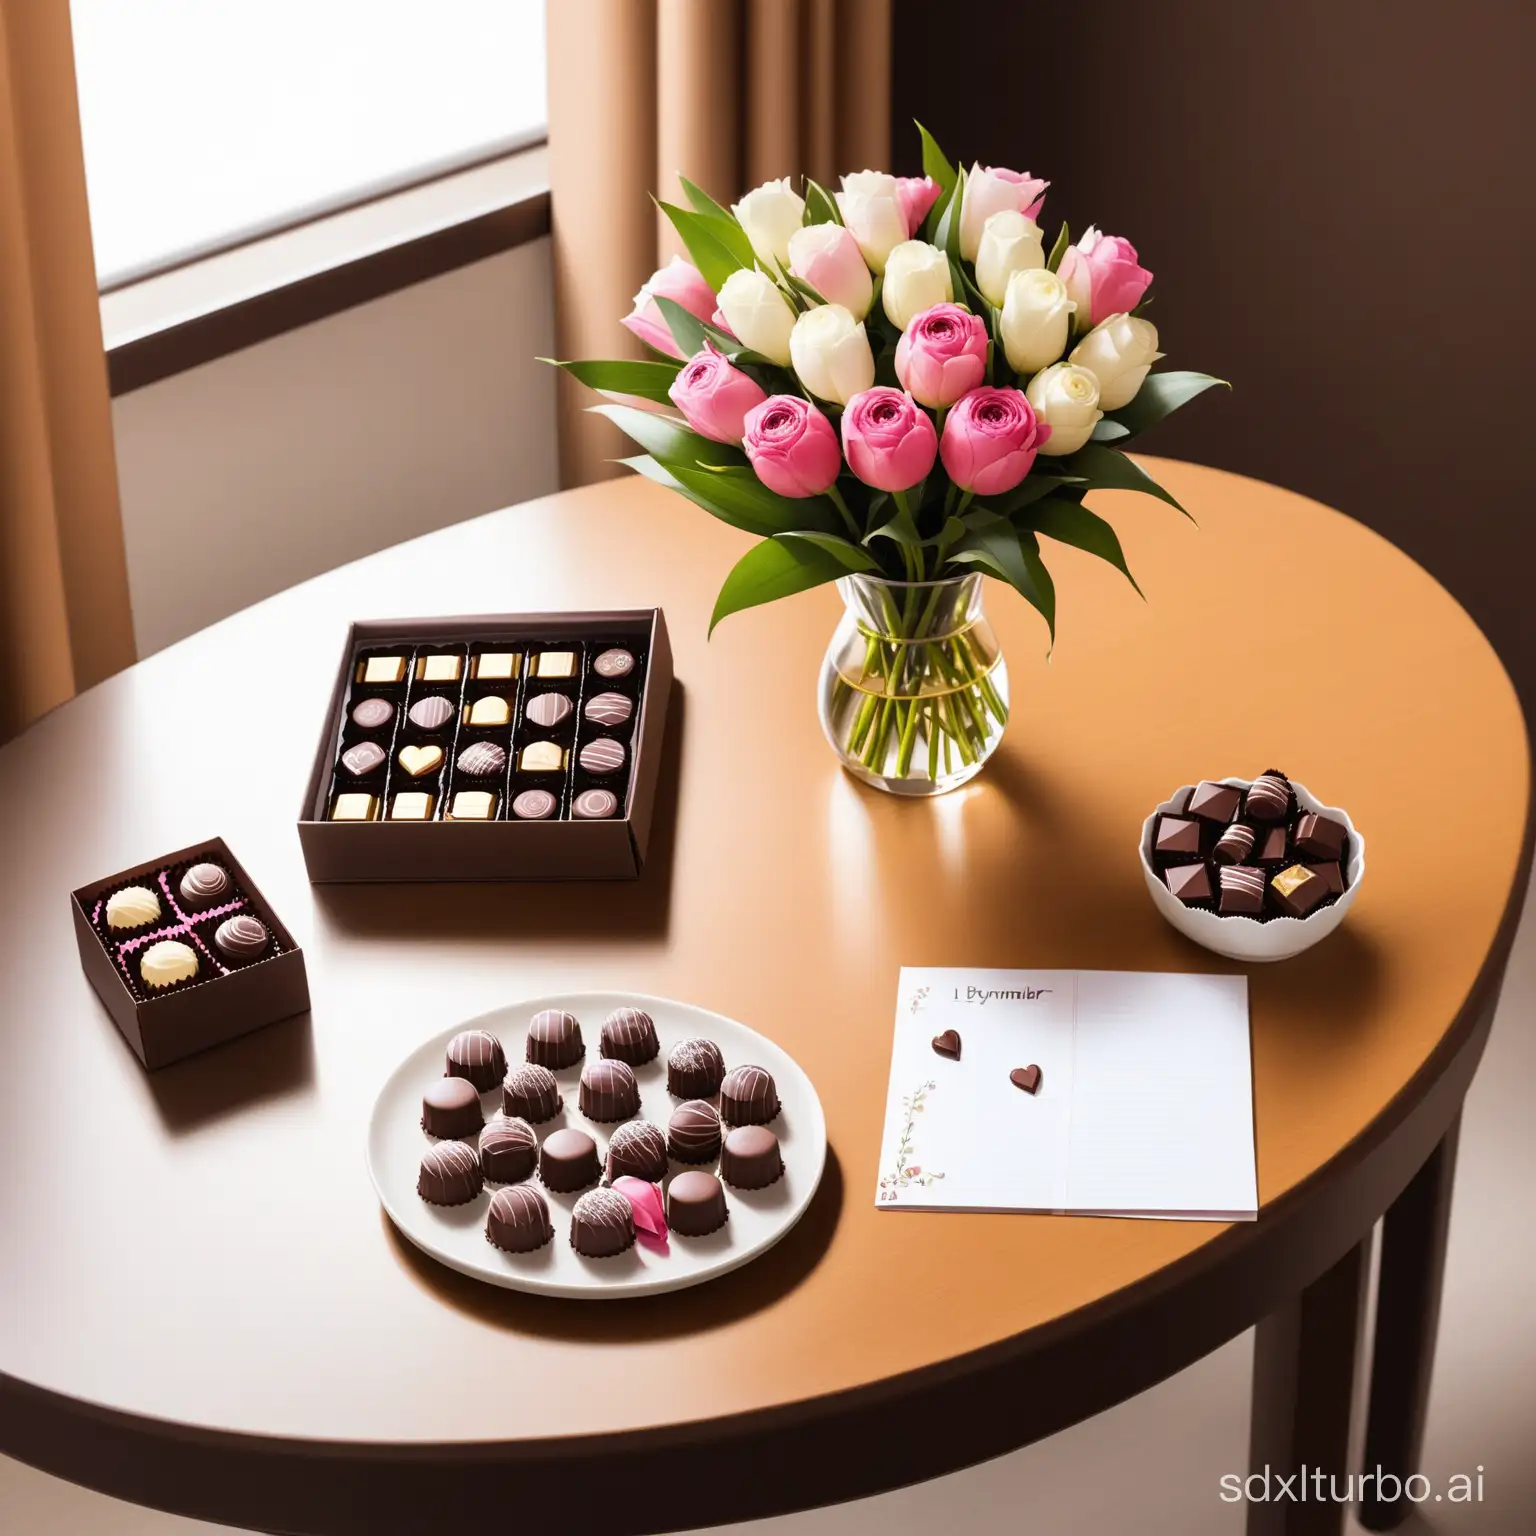 Flowers and chocolates on a table. A note on the table saying "İyi Bayramlar"